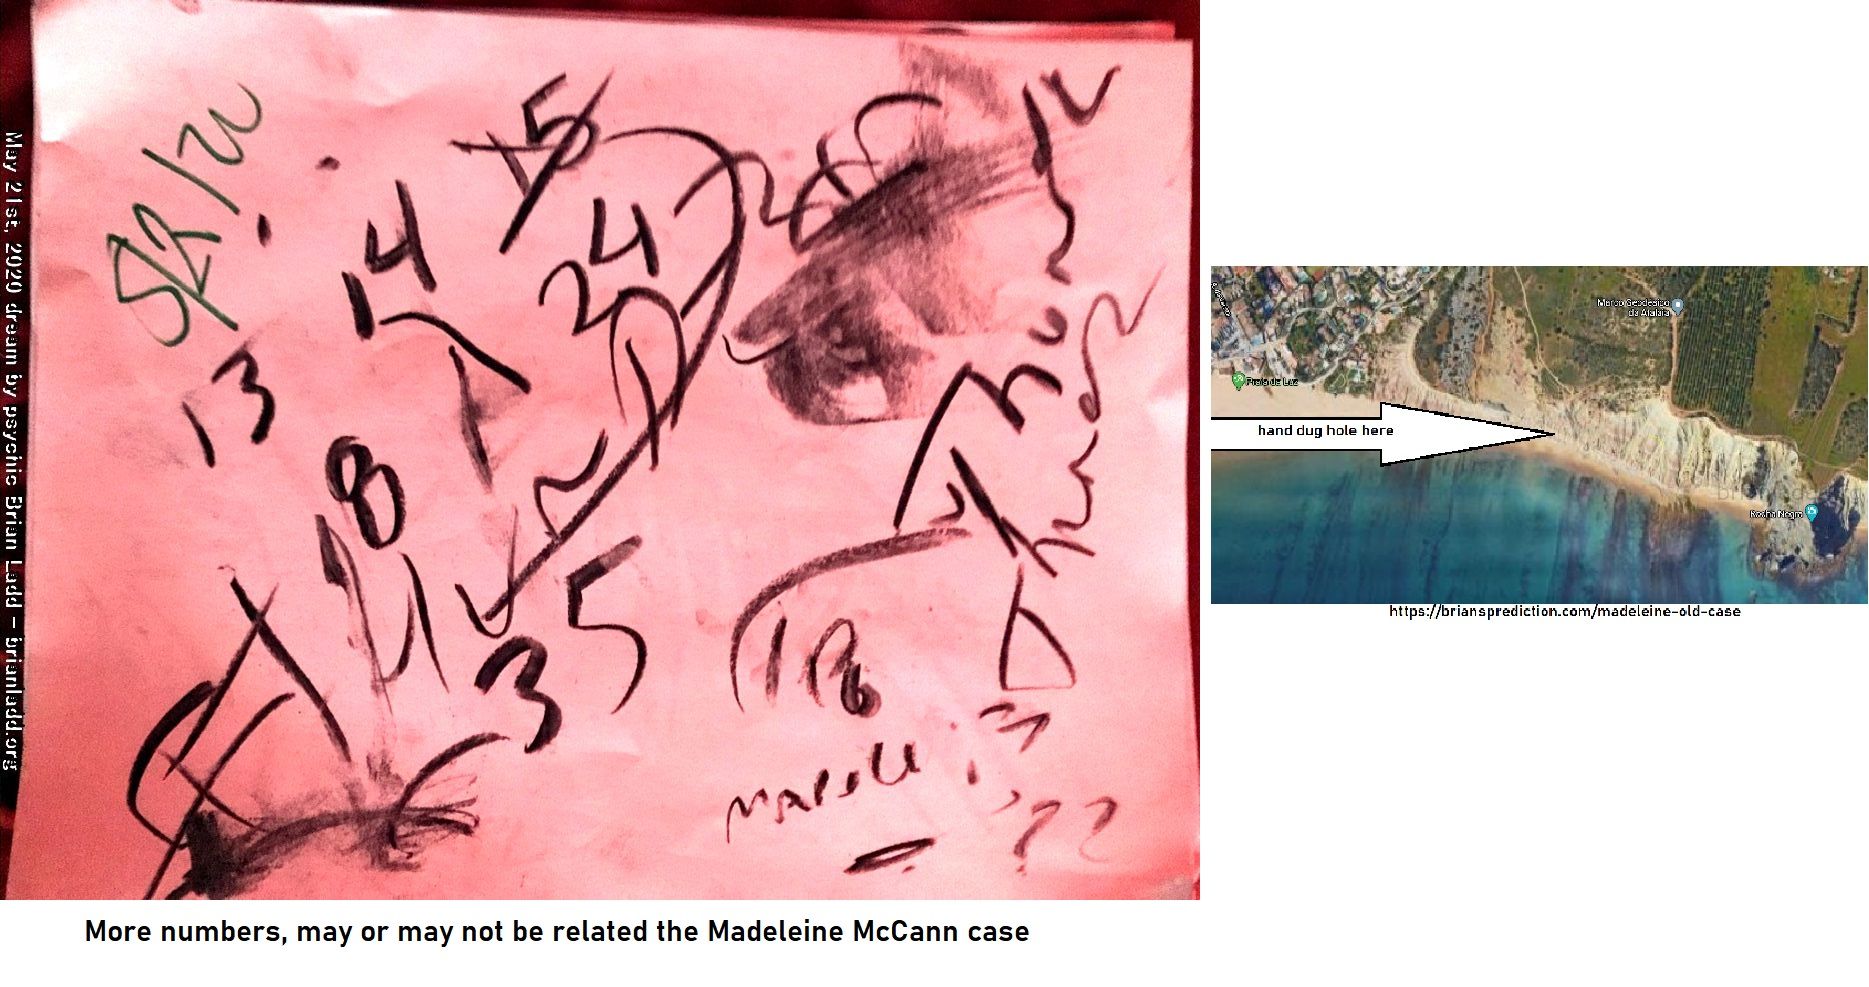 13091 21 May 2020 1 - More Numbers, May Or May Not Be Related The Madeleine McCann Case  From 4 Dd'S Dated May 21st...
More Numbers, May Or May Not Be Related The Madeleine McCann Case  From 4 Dd'S Dated May 21st, 2020  Everything Is The Same As Past Dreams Expect For The Name  Ulrich Markurth (spelling May Be Wrong Or It Might Be A Place In Portugal)  The Remains Of Missing Person Madeleine McCann Located By A Metal Detector At This Location, Praia Da Luz Portugal Beach, This Information Has Been Posted At Least 20 Times By Me, The Location Has Not Changed Nor Has Anything Else On The 4 Dream Drawings From May 21st, 2020....Anytway, I Know This Area Has Been Searched Before...Please Do It Again, I'Ve Been Working On This Case Before She Was Reported Missing.  Old Case At   https://briansprediction.com/Madeleine-Old-Case   https://briansprediction.com/Madeleine-New-Case  Or Search My Site For The New Stuff (logon Suggested To View Images In Full)   info  Madeleine Beth McCann (born 12 May 2003) disappeared on the evening of 3 May 2007 from her bed in a holiday apartment at a resort in Praia da Luz, in the Algarve region of Portugal. The Daily Telegraph described the disappearance as 